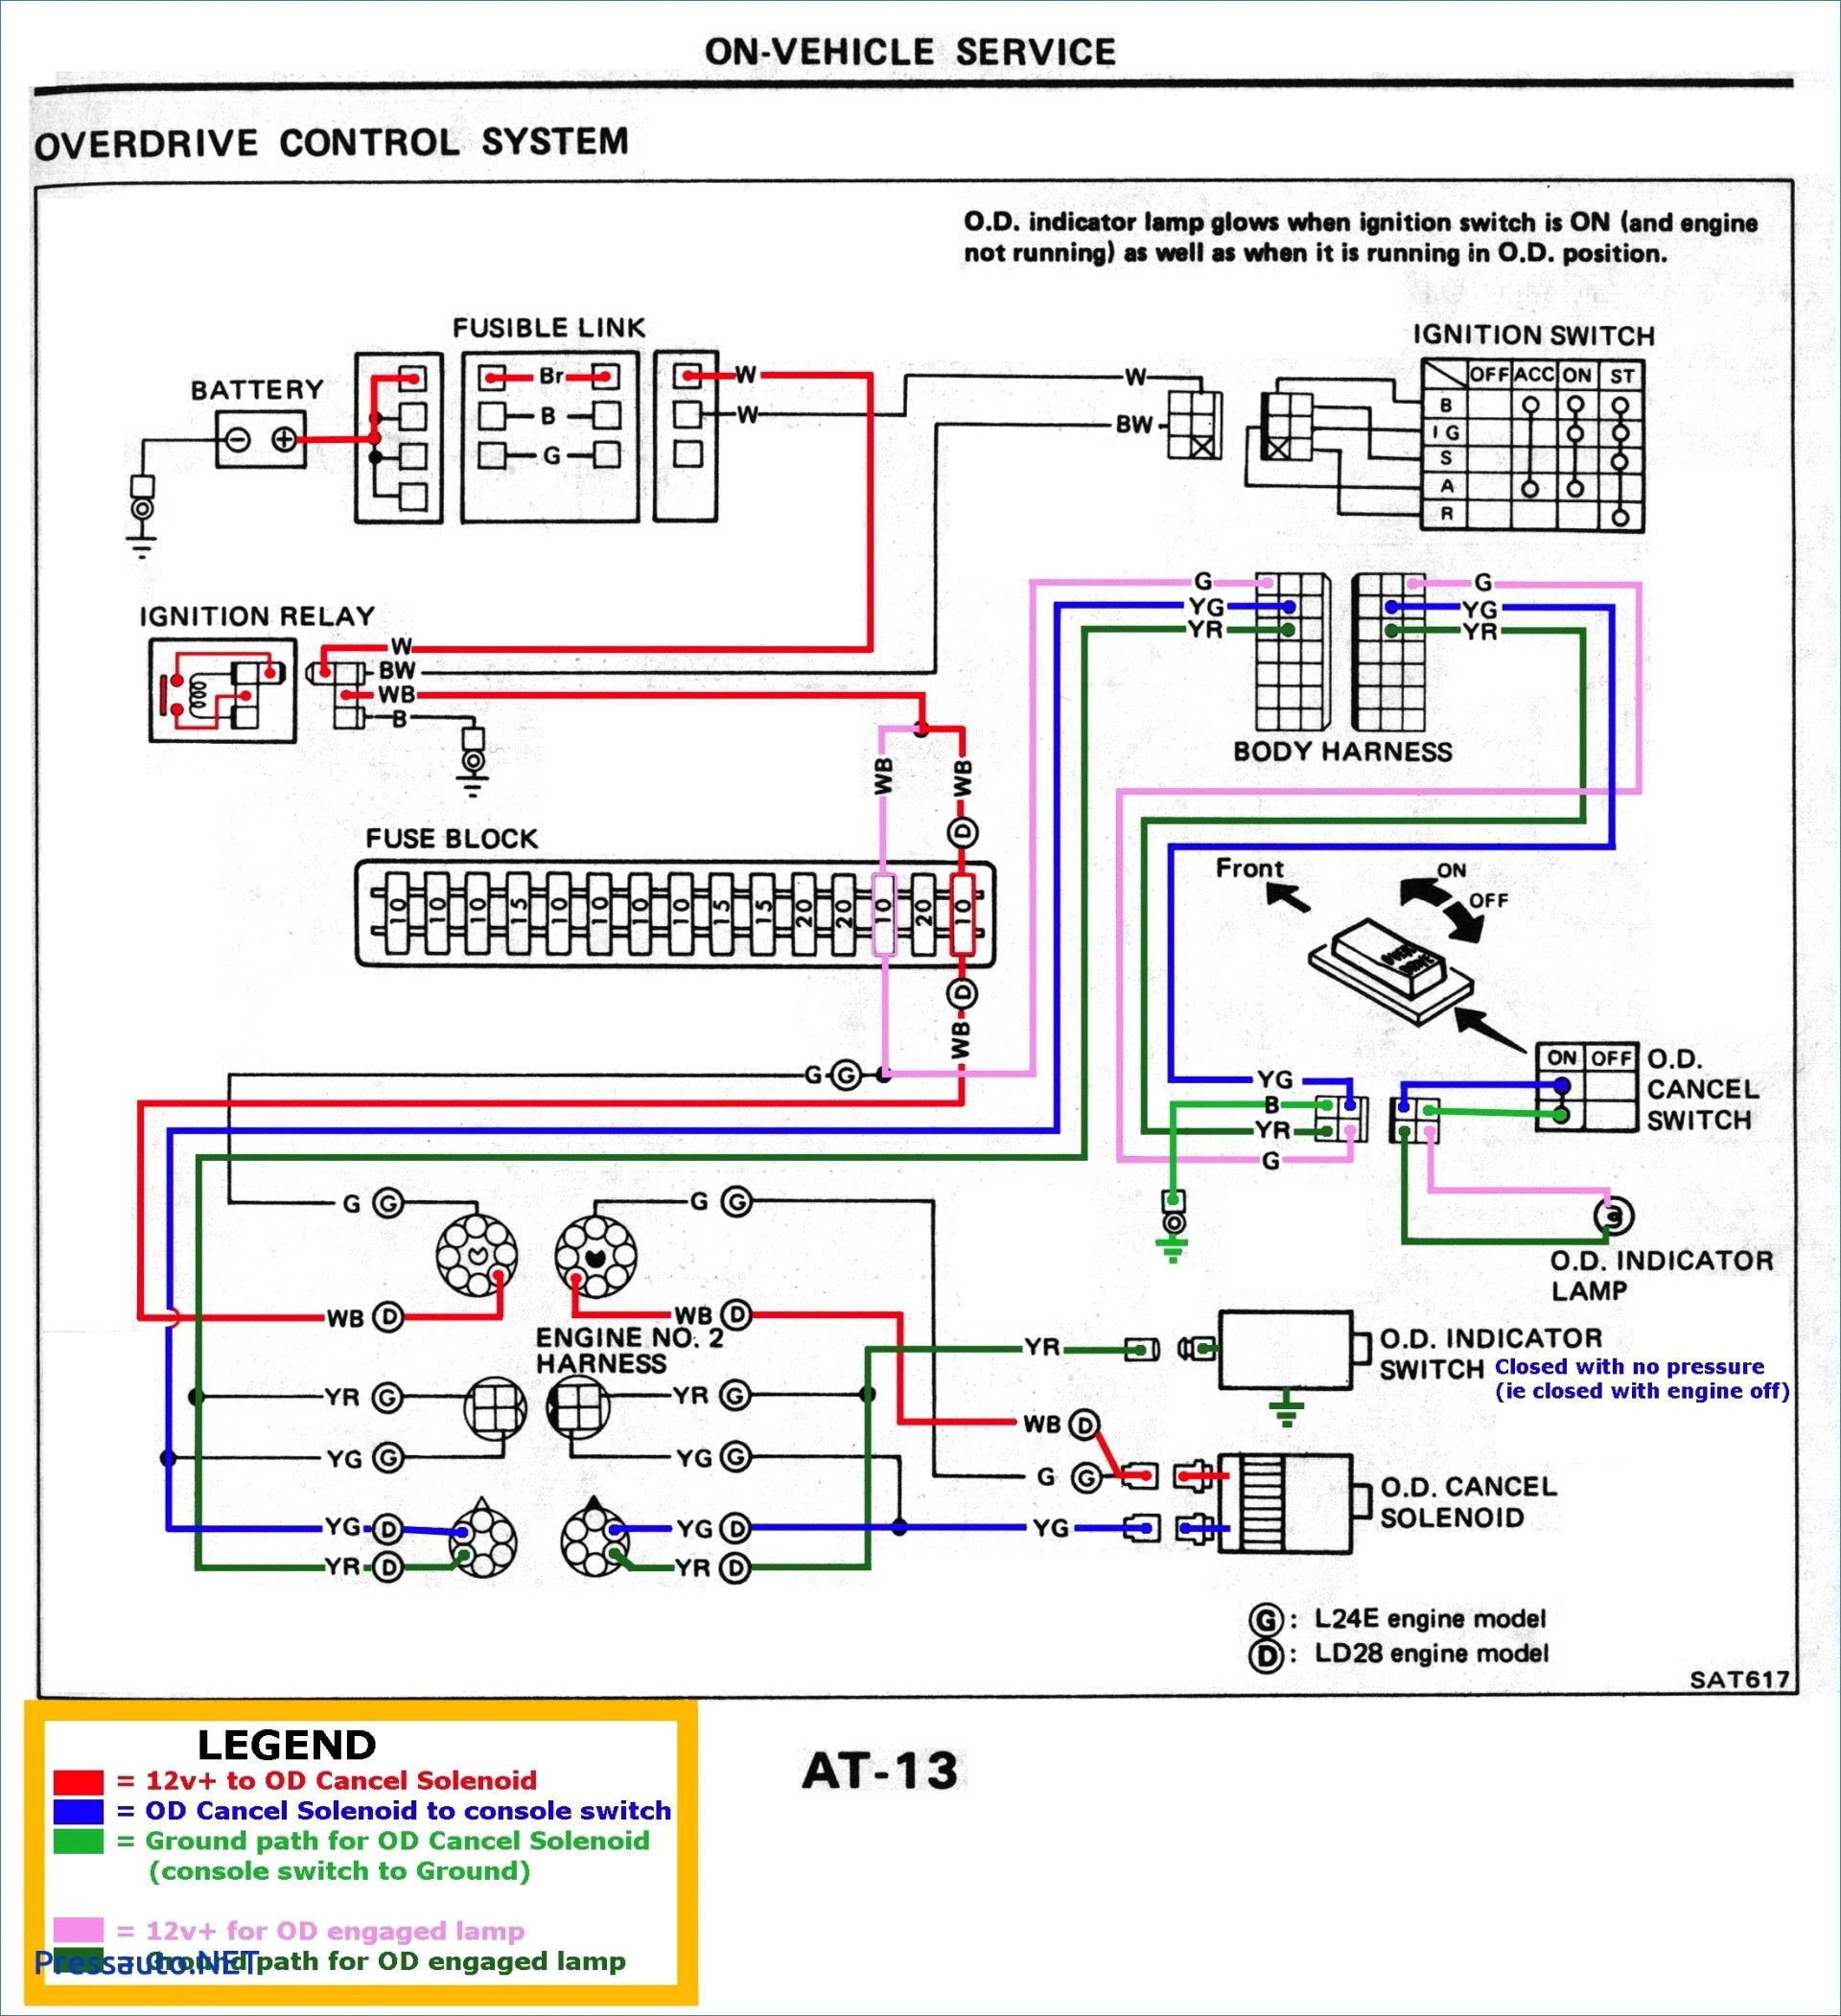 Wiring Diagram for 4 Wire Trailer Lights Refrence Chevy 7 Pin Trailer Wiring Diagram sources